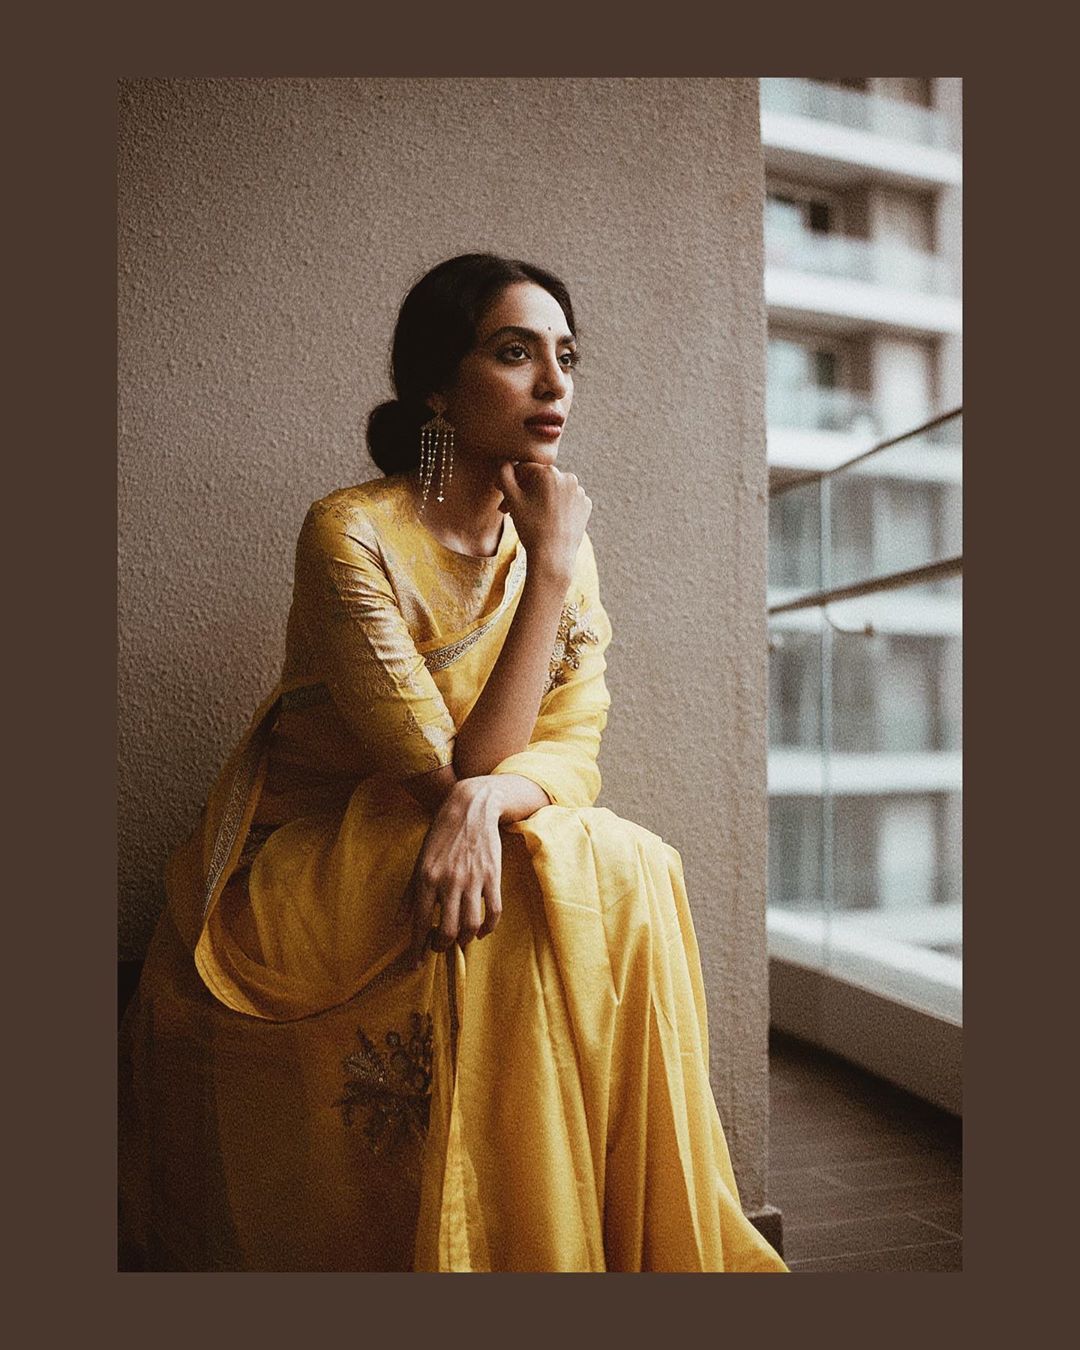 Sobhita Dhulipala Says Society Makes The Trauma Of A Miscarriage Worse By Turning It Into A Taboo